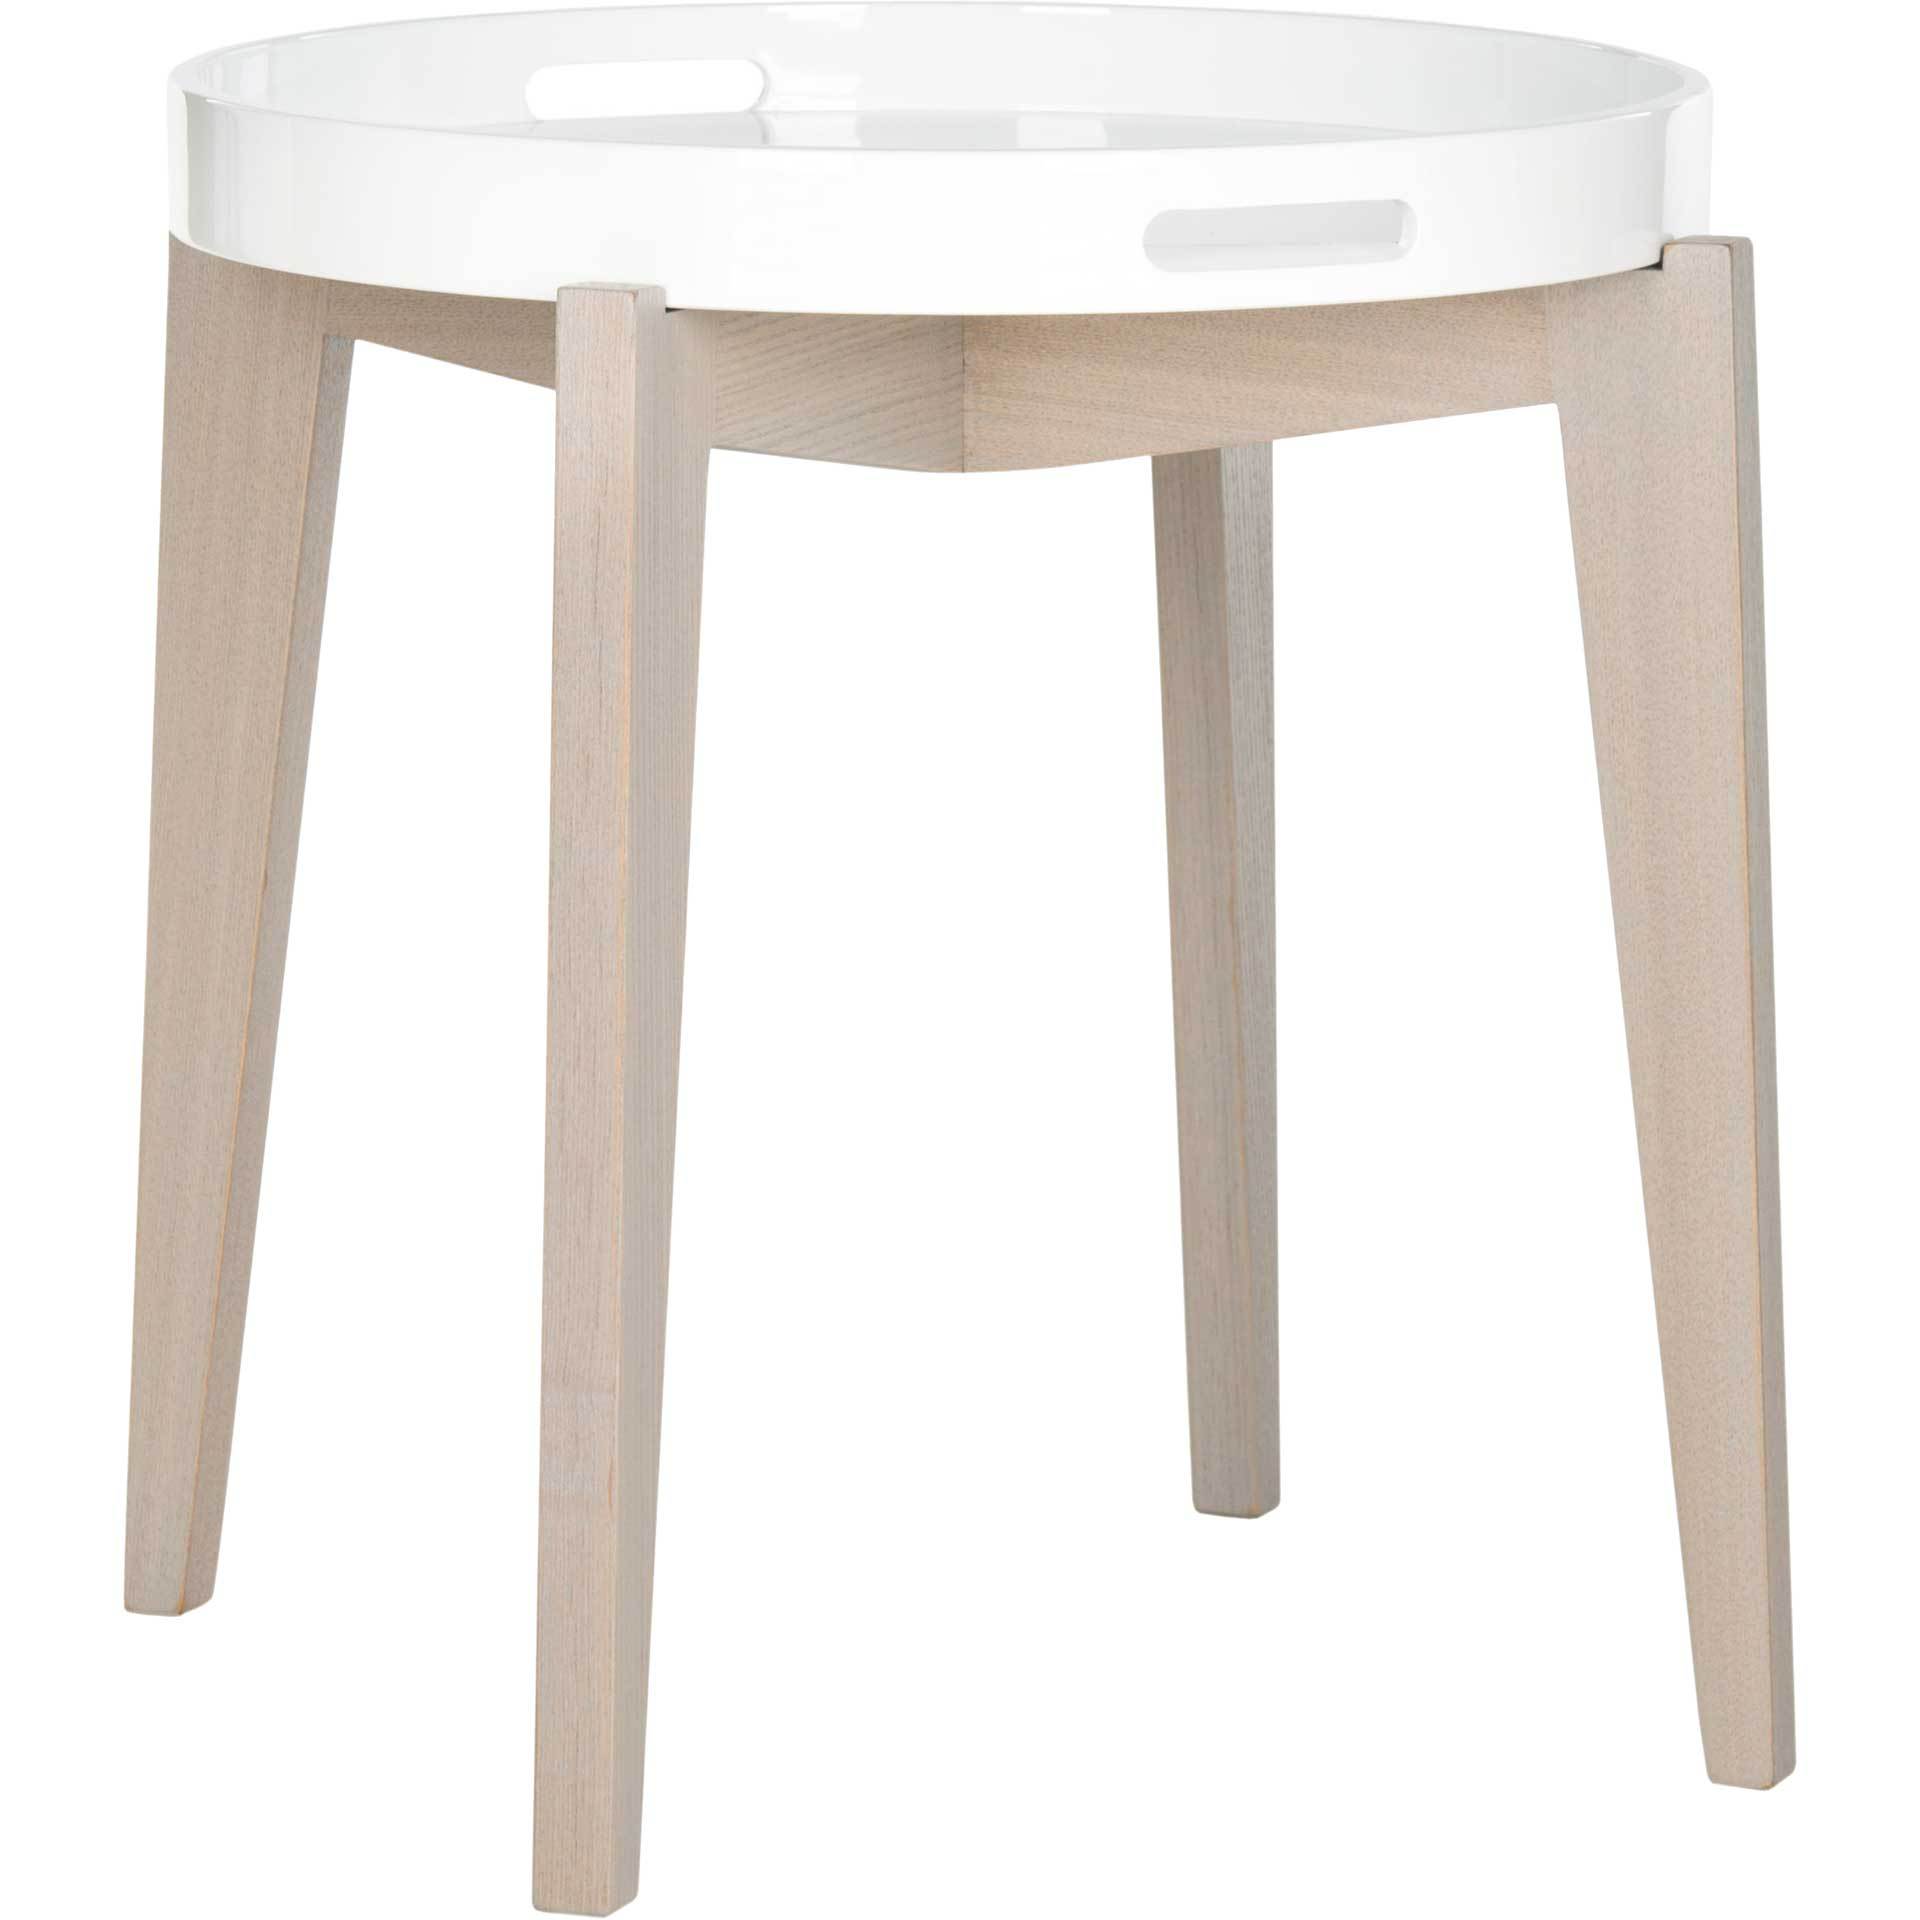 Beckett Lacquer Tray Top Side Table White/Beige